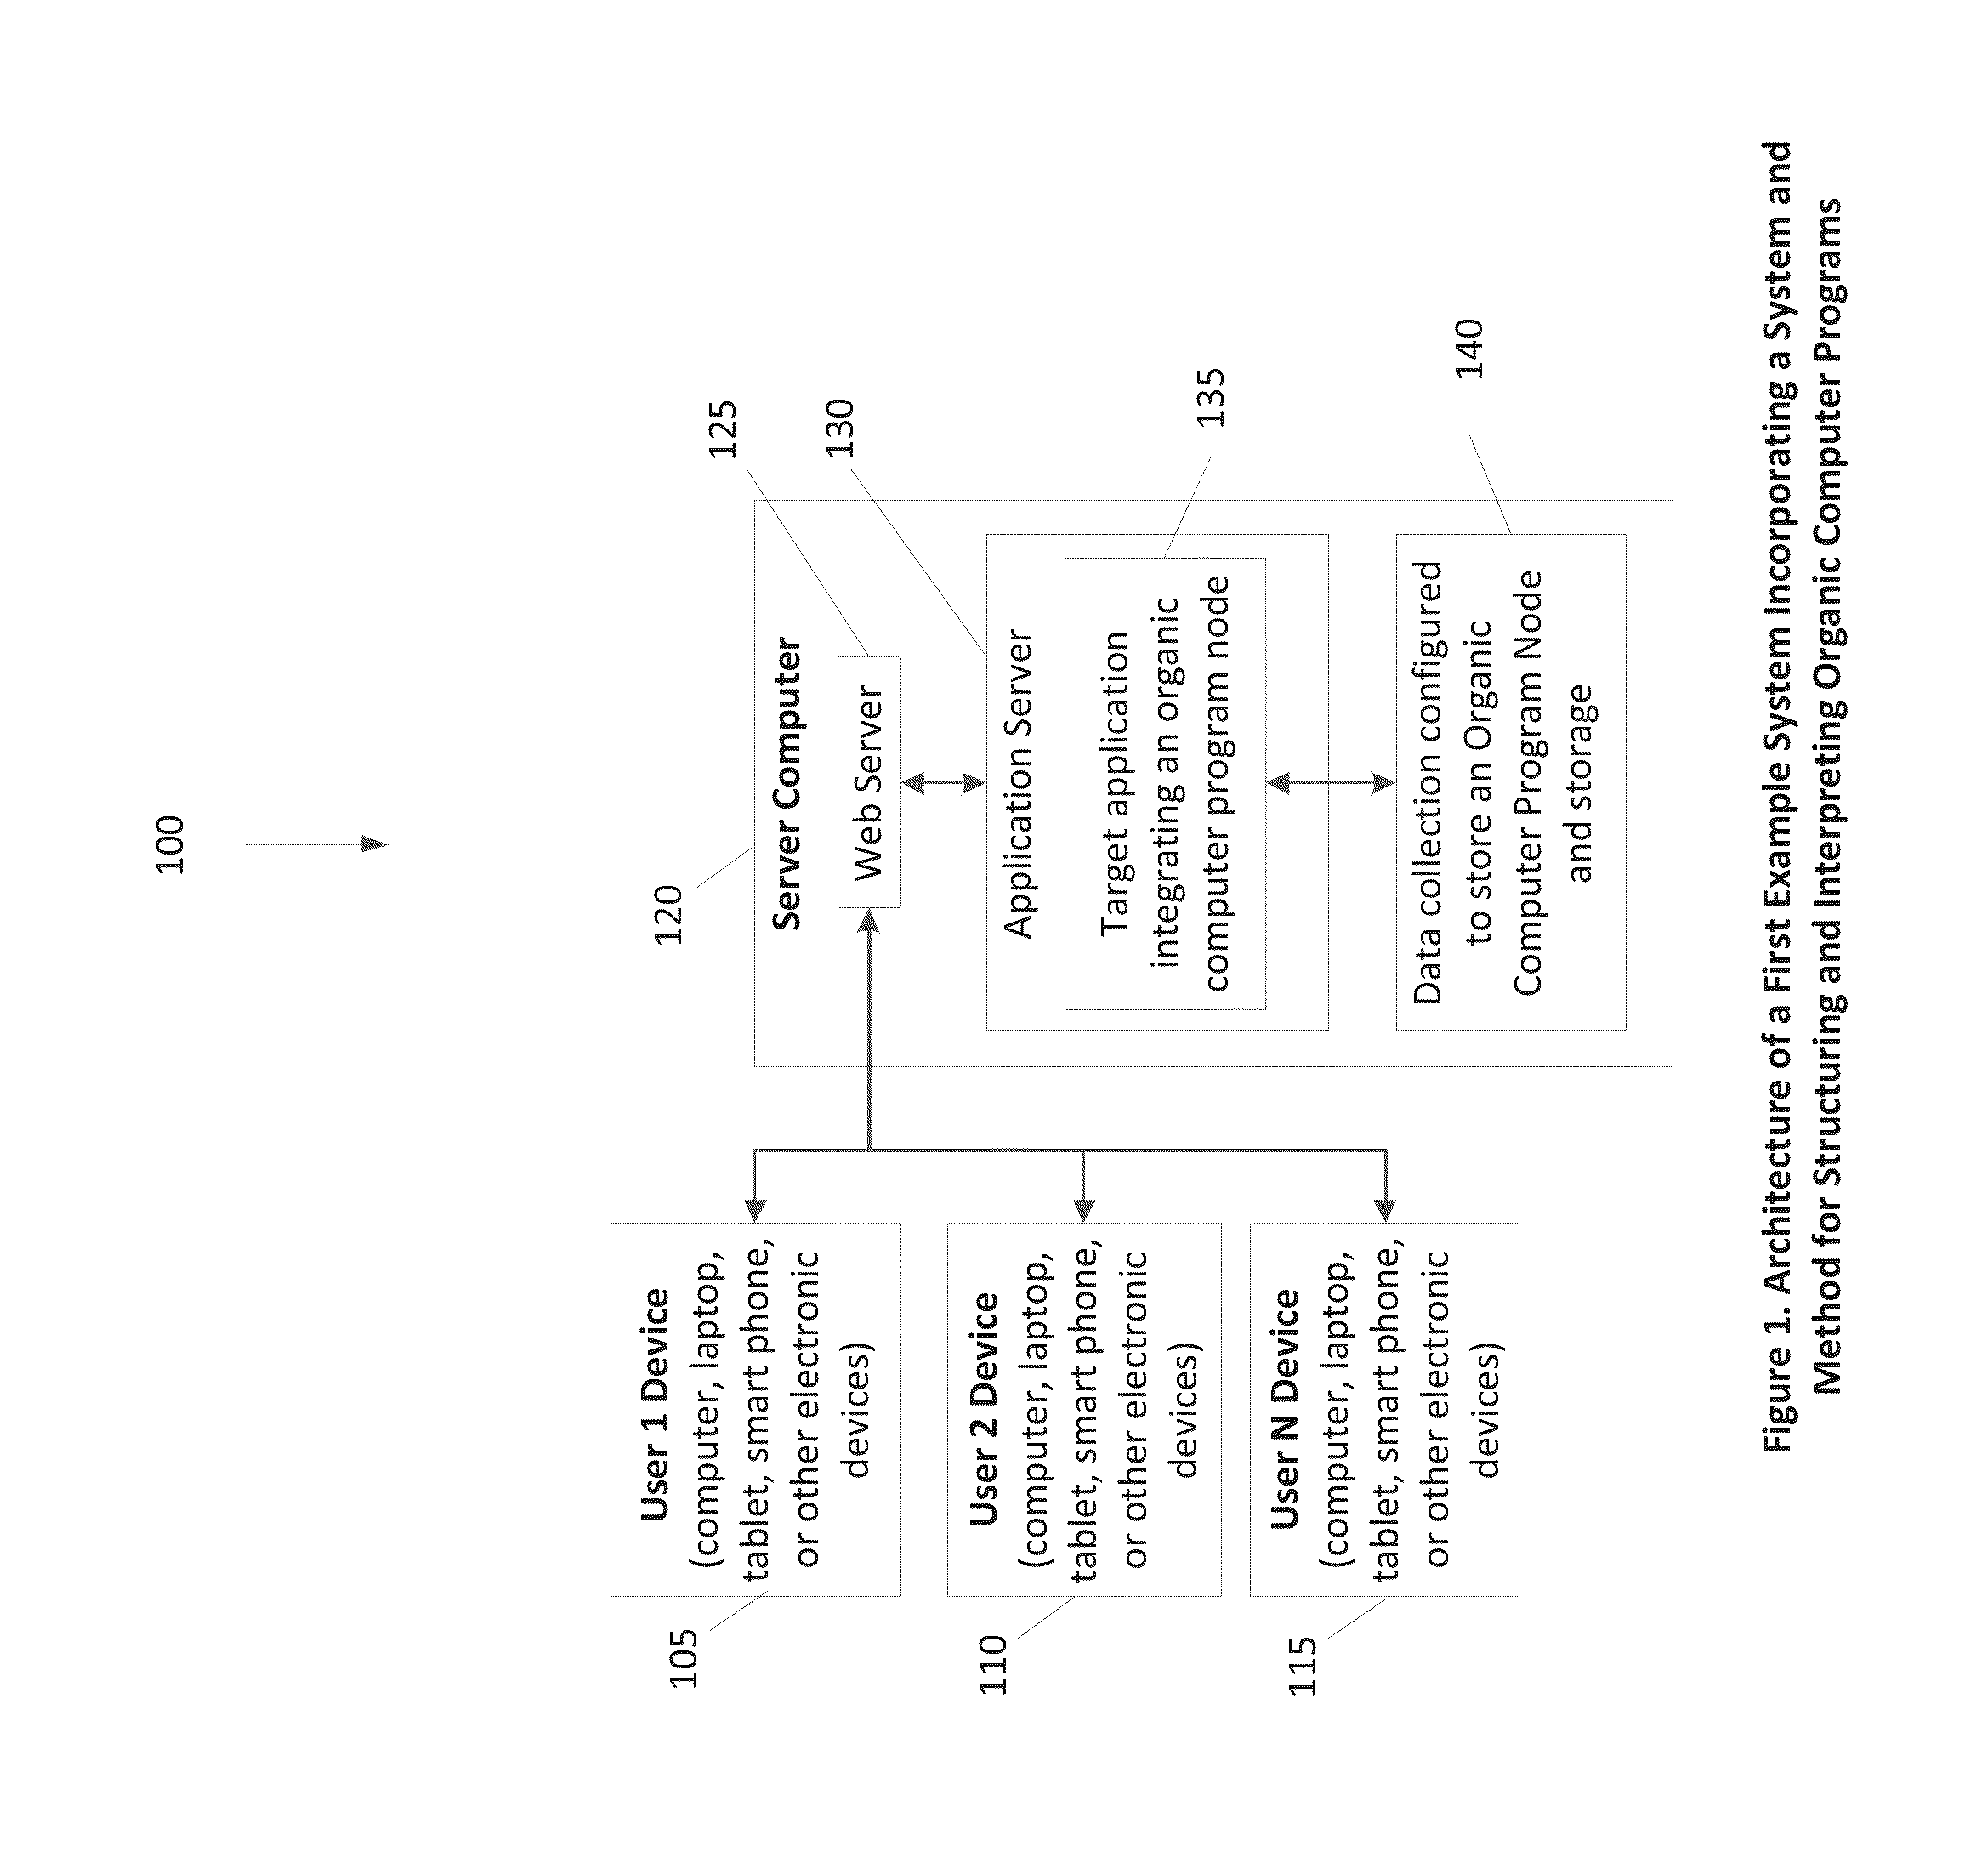 System and method for the structuring and interpretation of organic computer programs